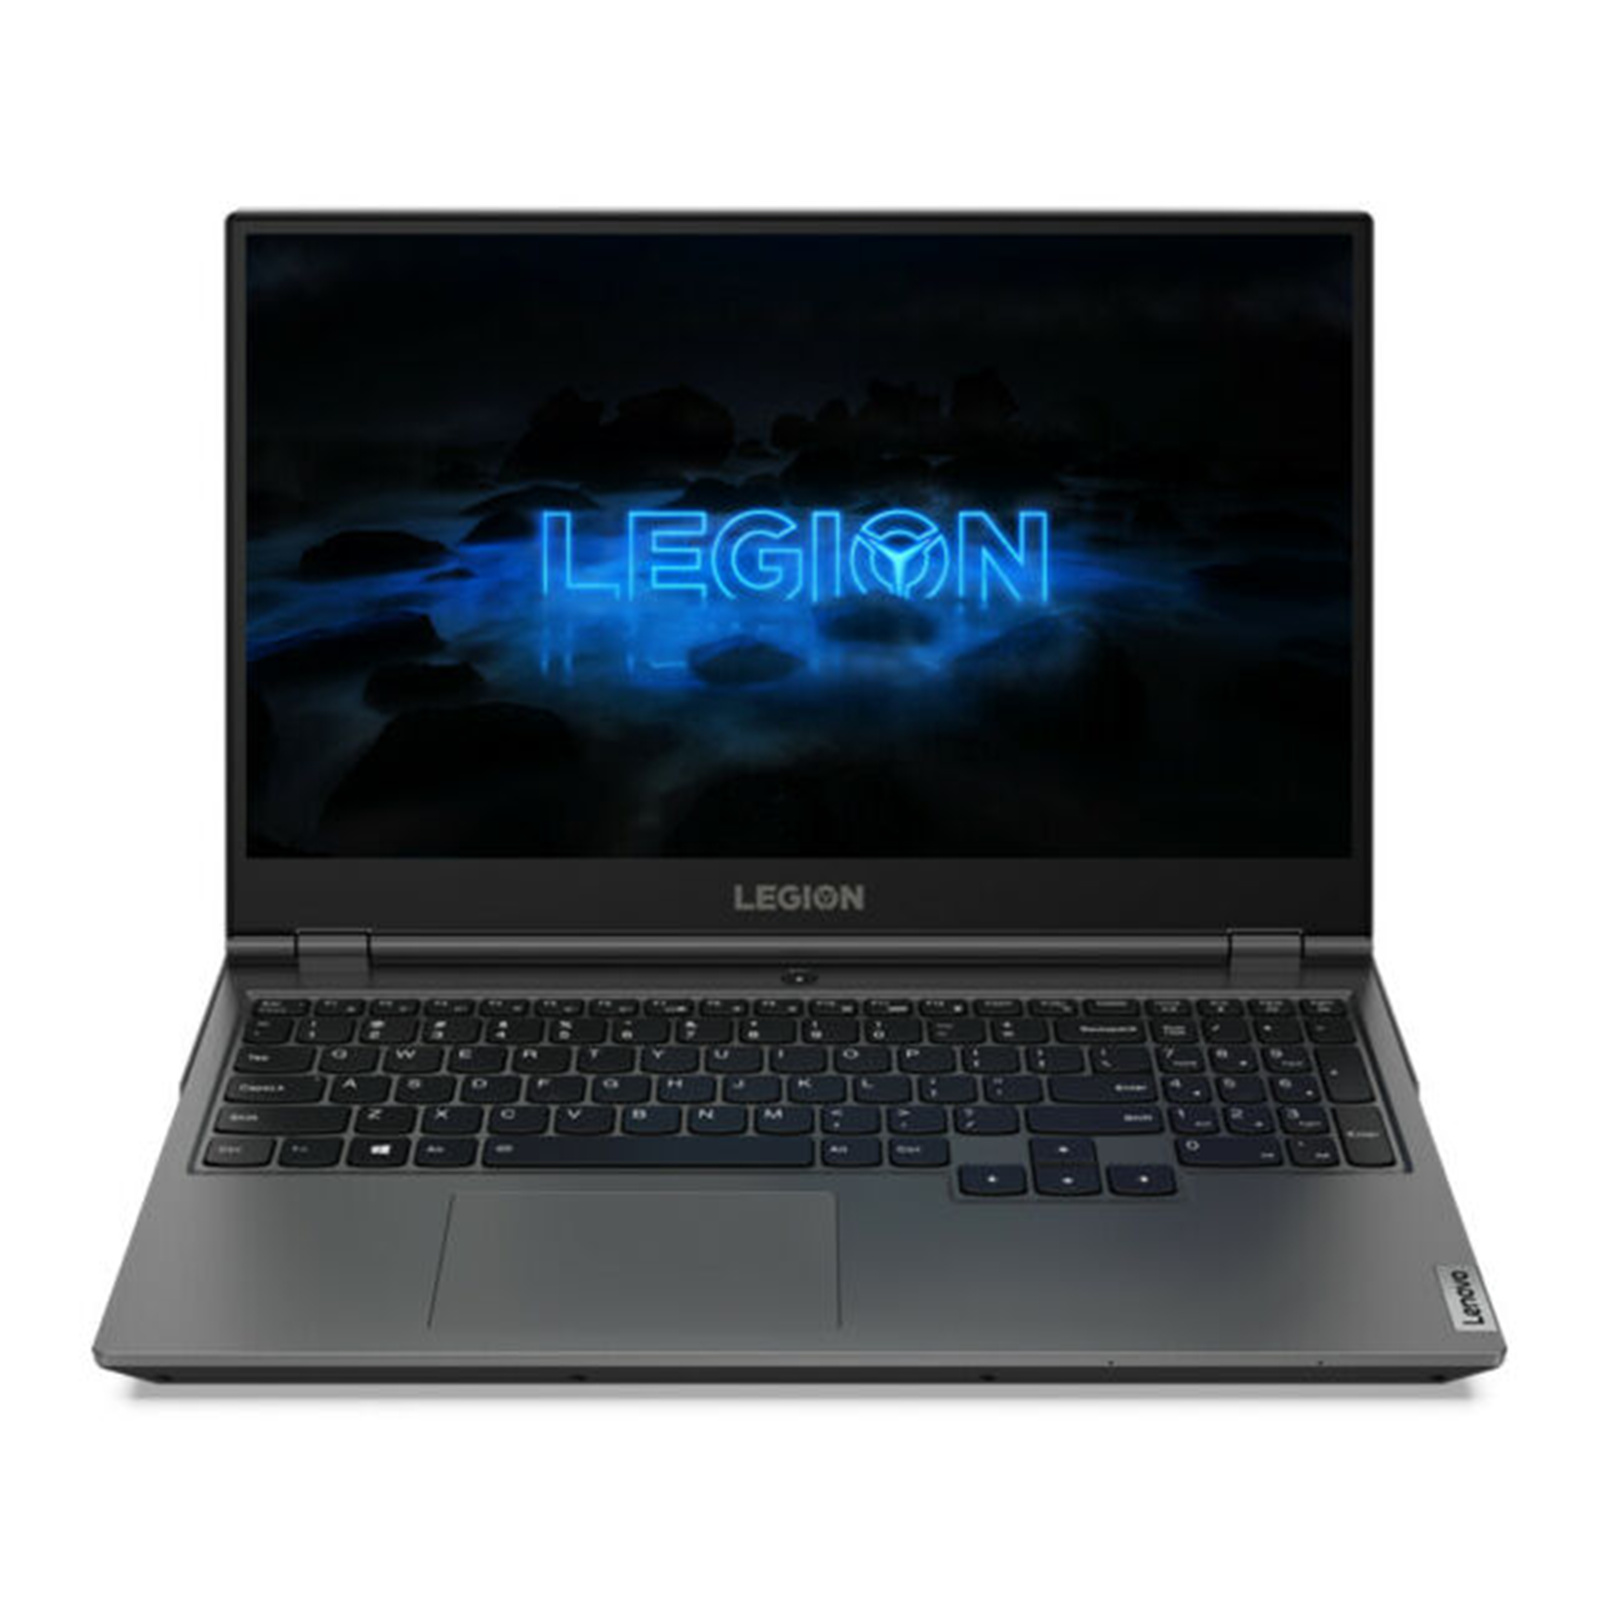 Dempsey annoncere Rettidig Buy the Lenovo Legion 5P RTX 2060 Gaming Laptop 15.6" FHD AG IPS 300nits  Intel... ( 82AW002UAU ) online - PBTech.com/pacific